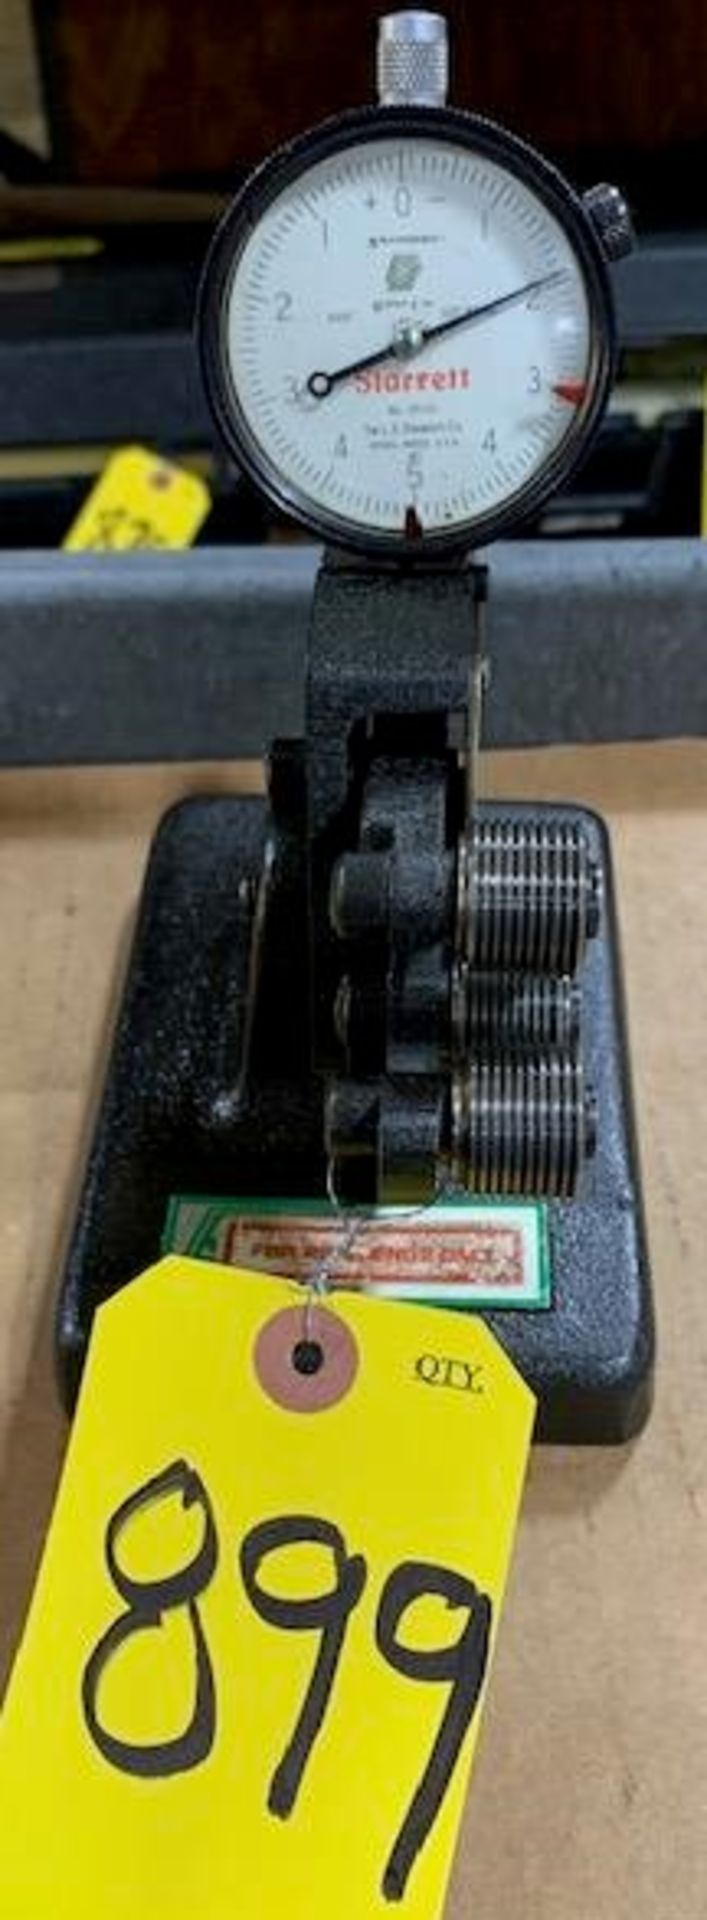 PRATT AND WHITNEY TRI ROLL NO. 5 THREAD COMPARATOR WITH STARRETT 25-111 DIAL INDICATOR